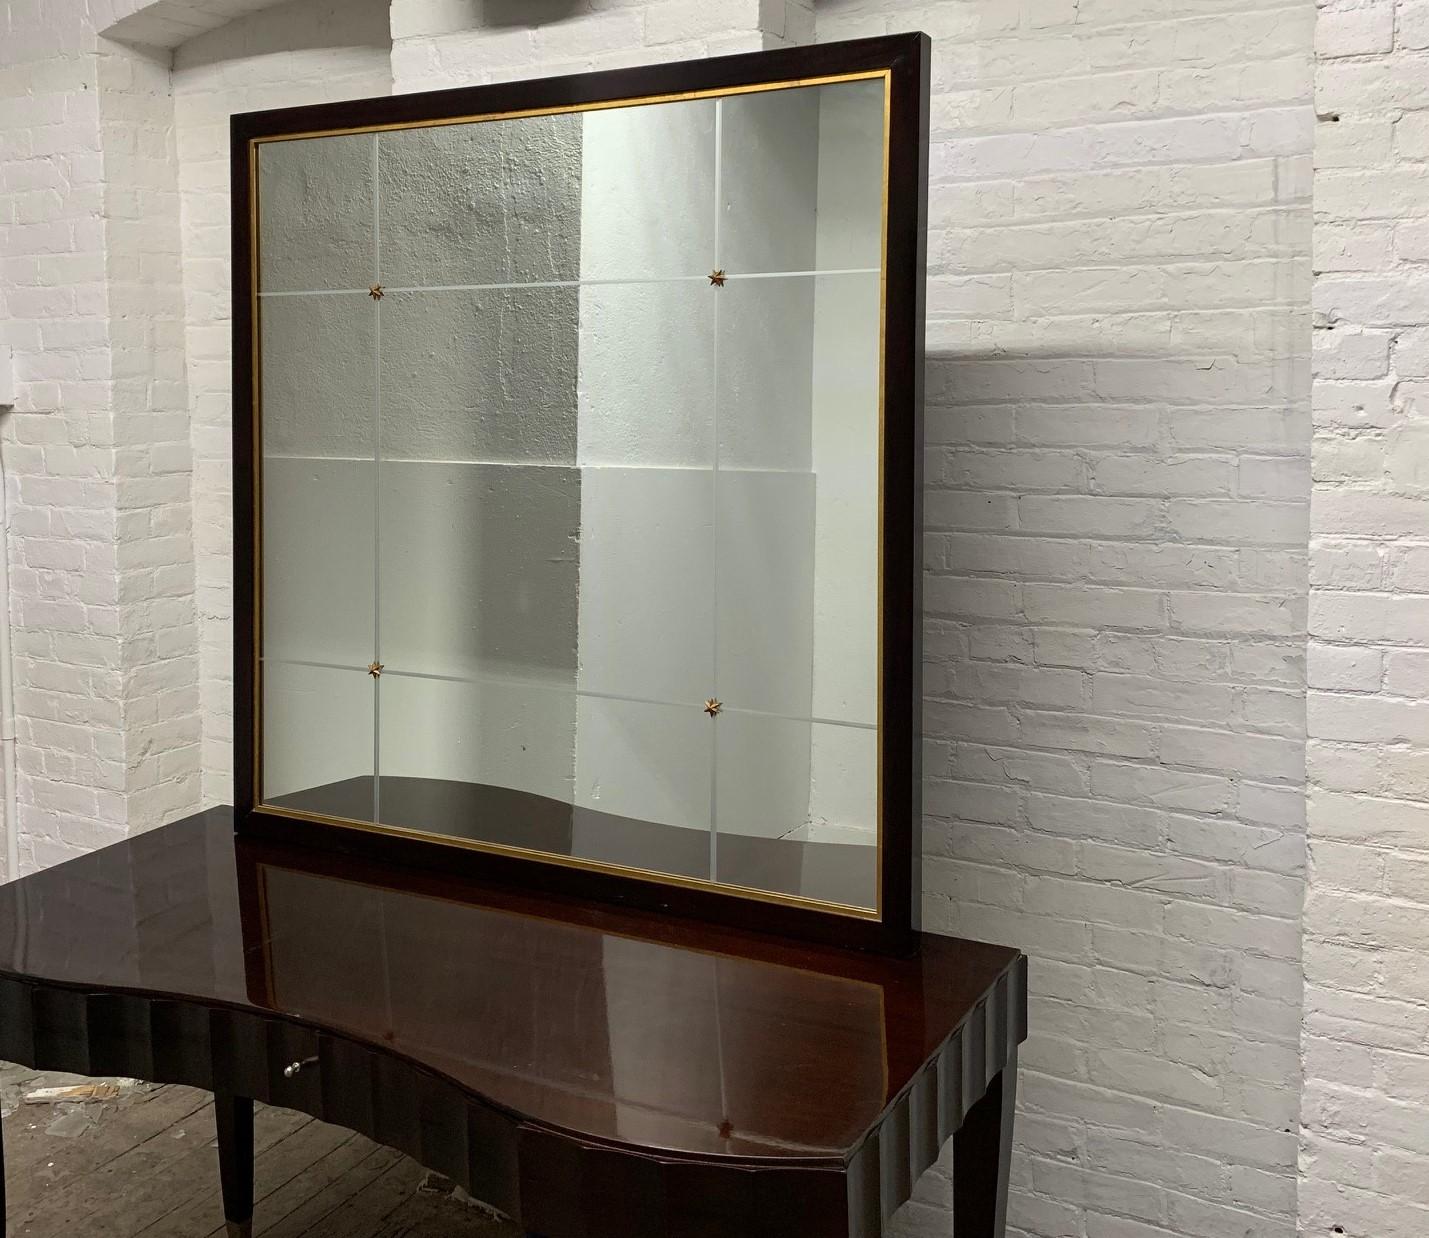 Barbara Barry for Baker Furniture Co Mahogany Mirror. The mirror is etched forming nine square and rectangular shapes with gilded star motifs. The mirror has a matching desk and chair listed separately.